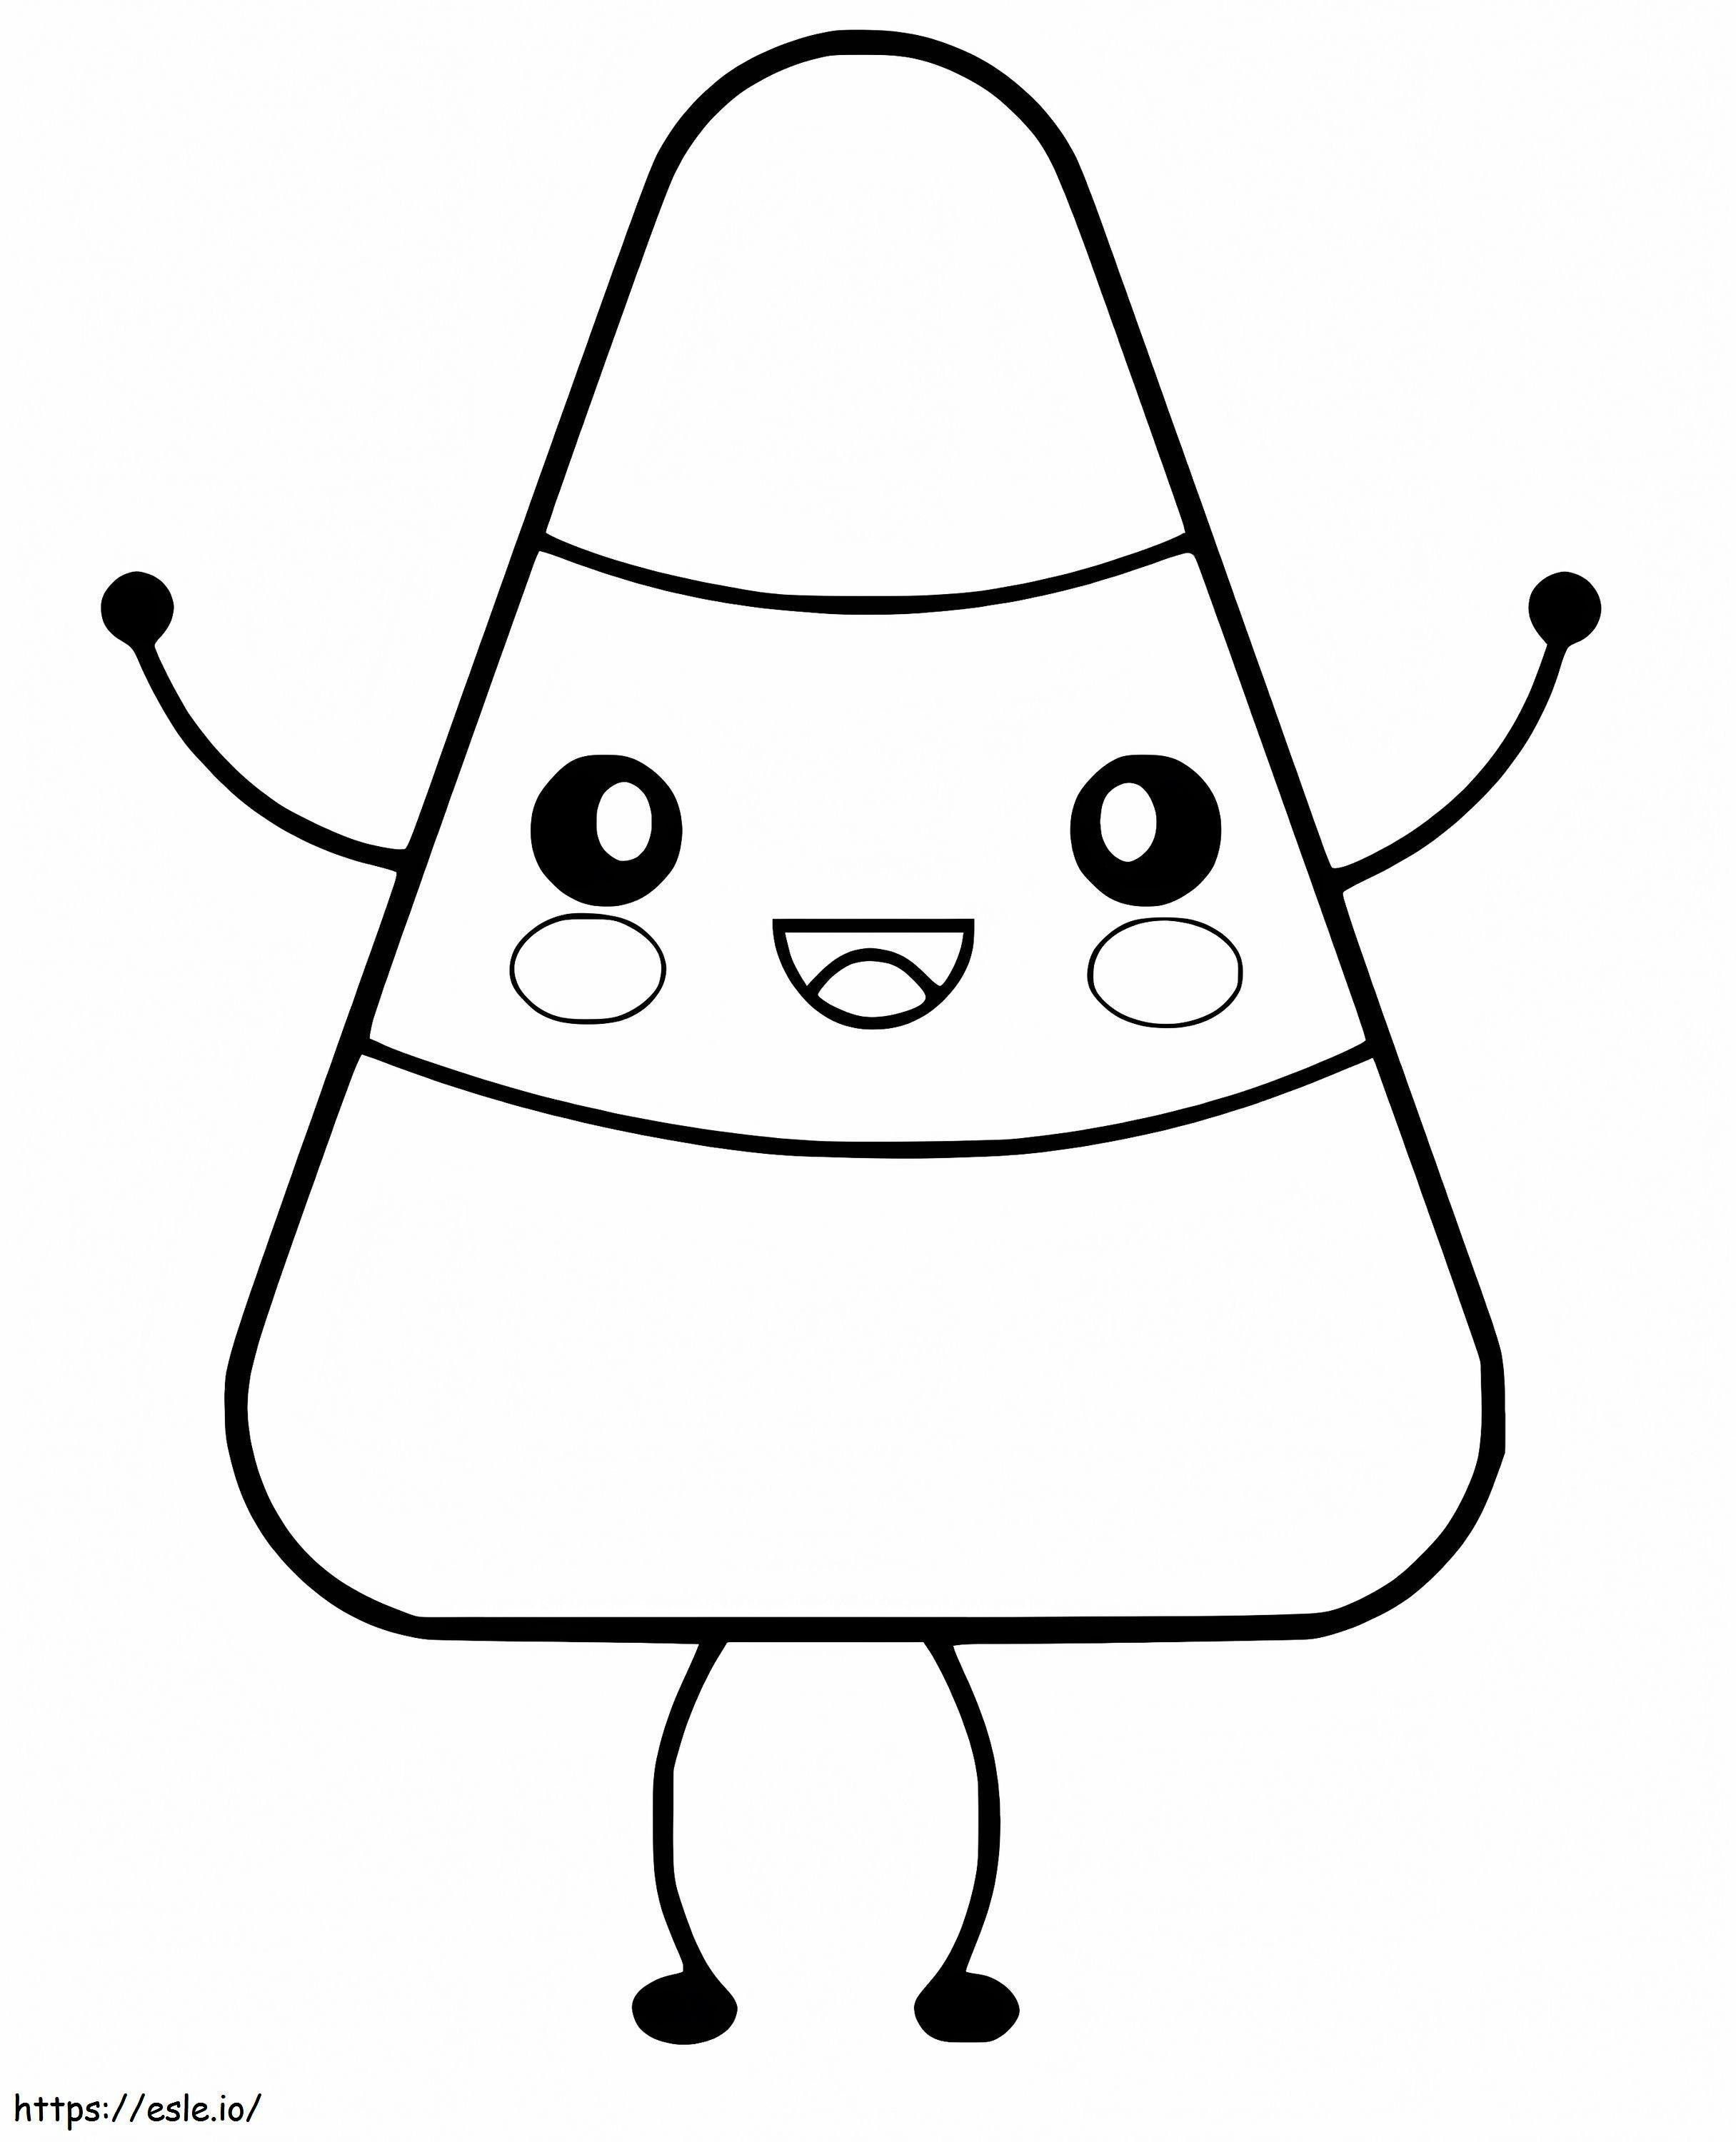 Cute Candy Corn coloring page